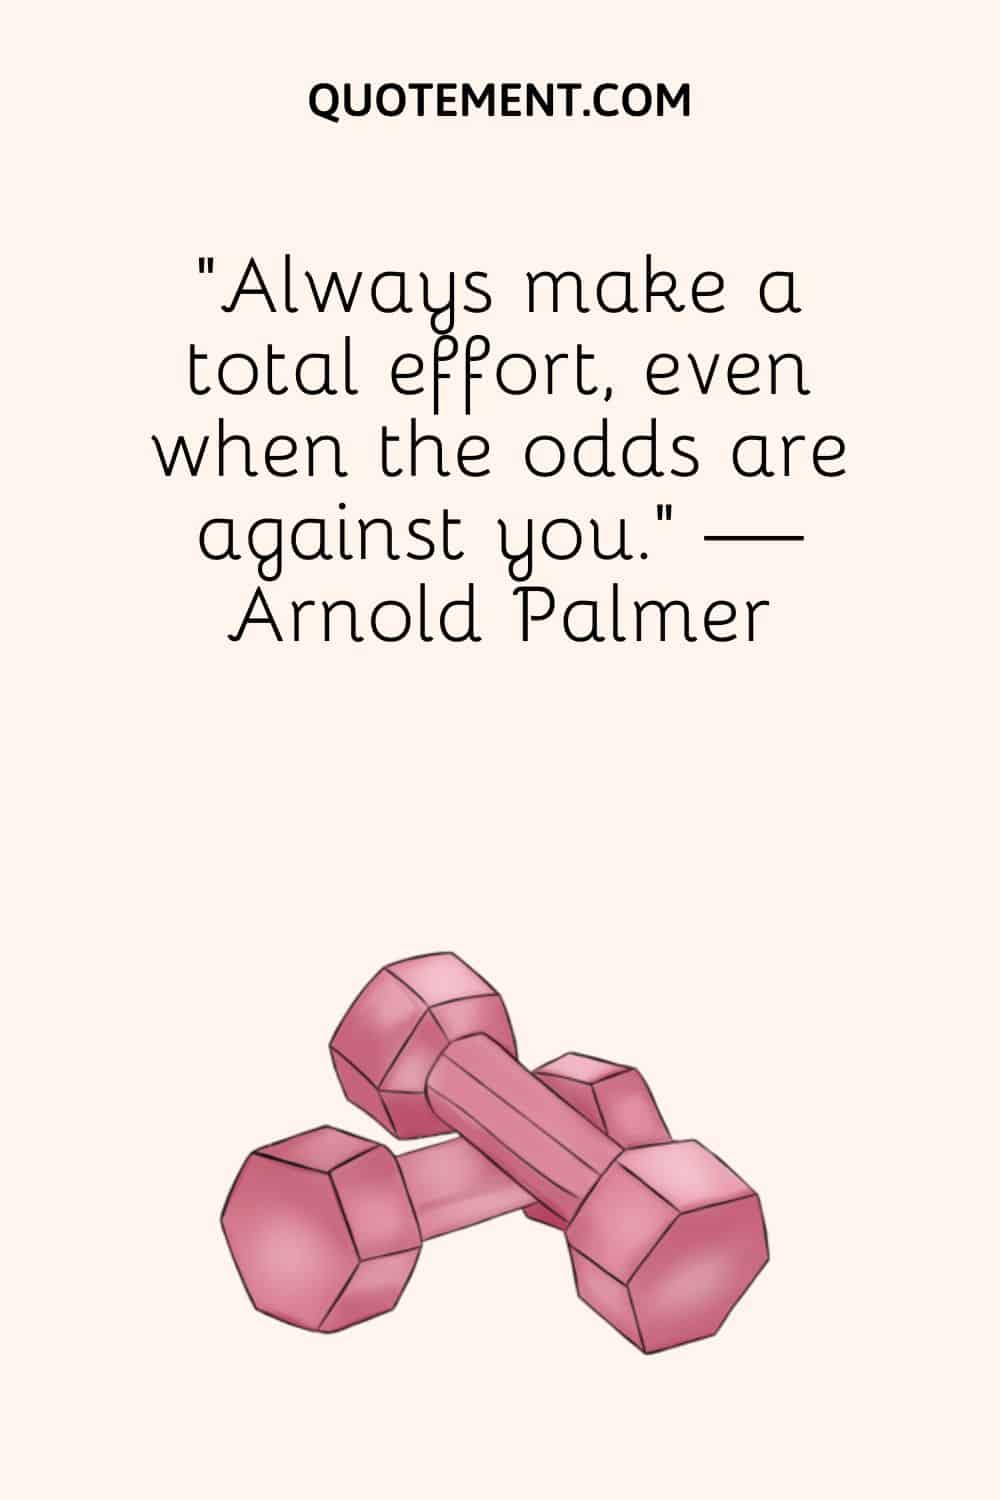 “Always make a total effort, even when the odds are against you.” — Arnold Palmer